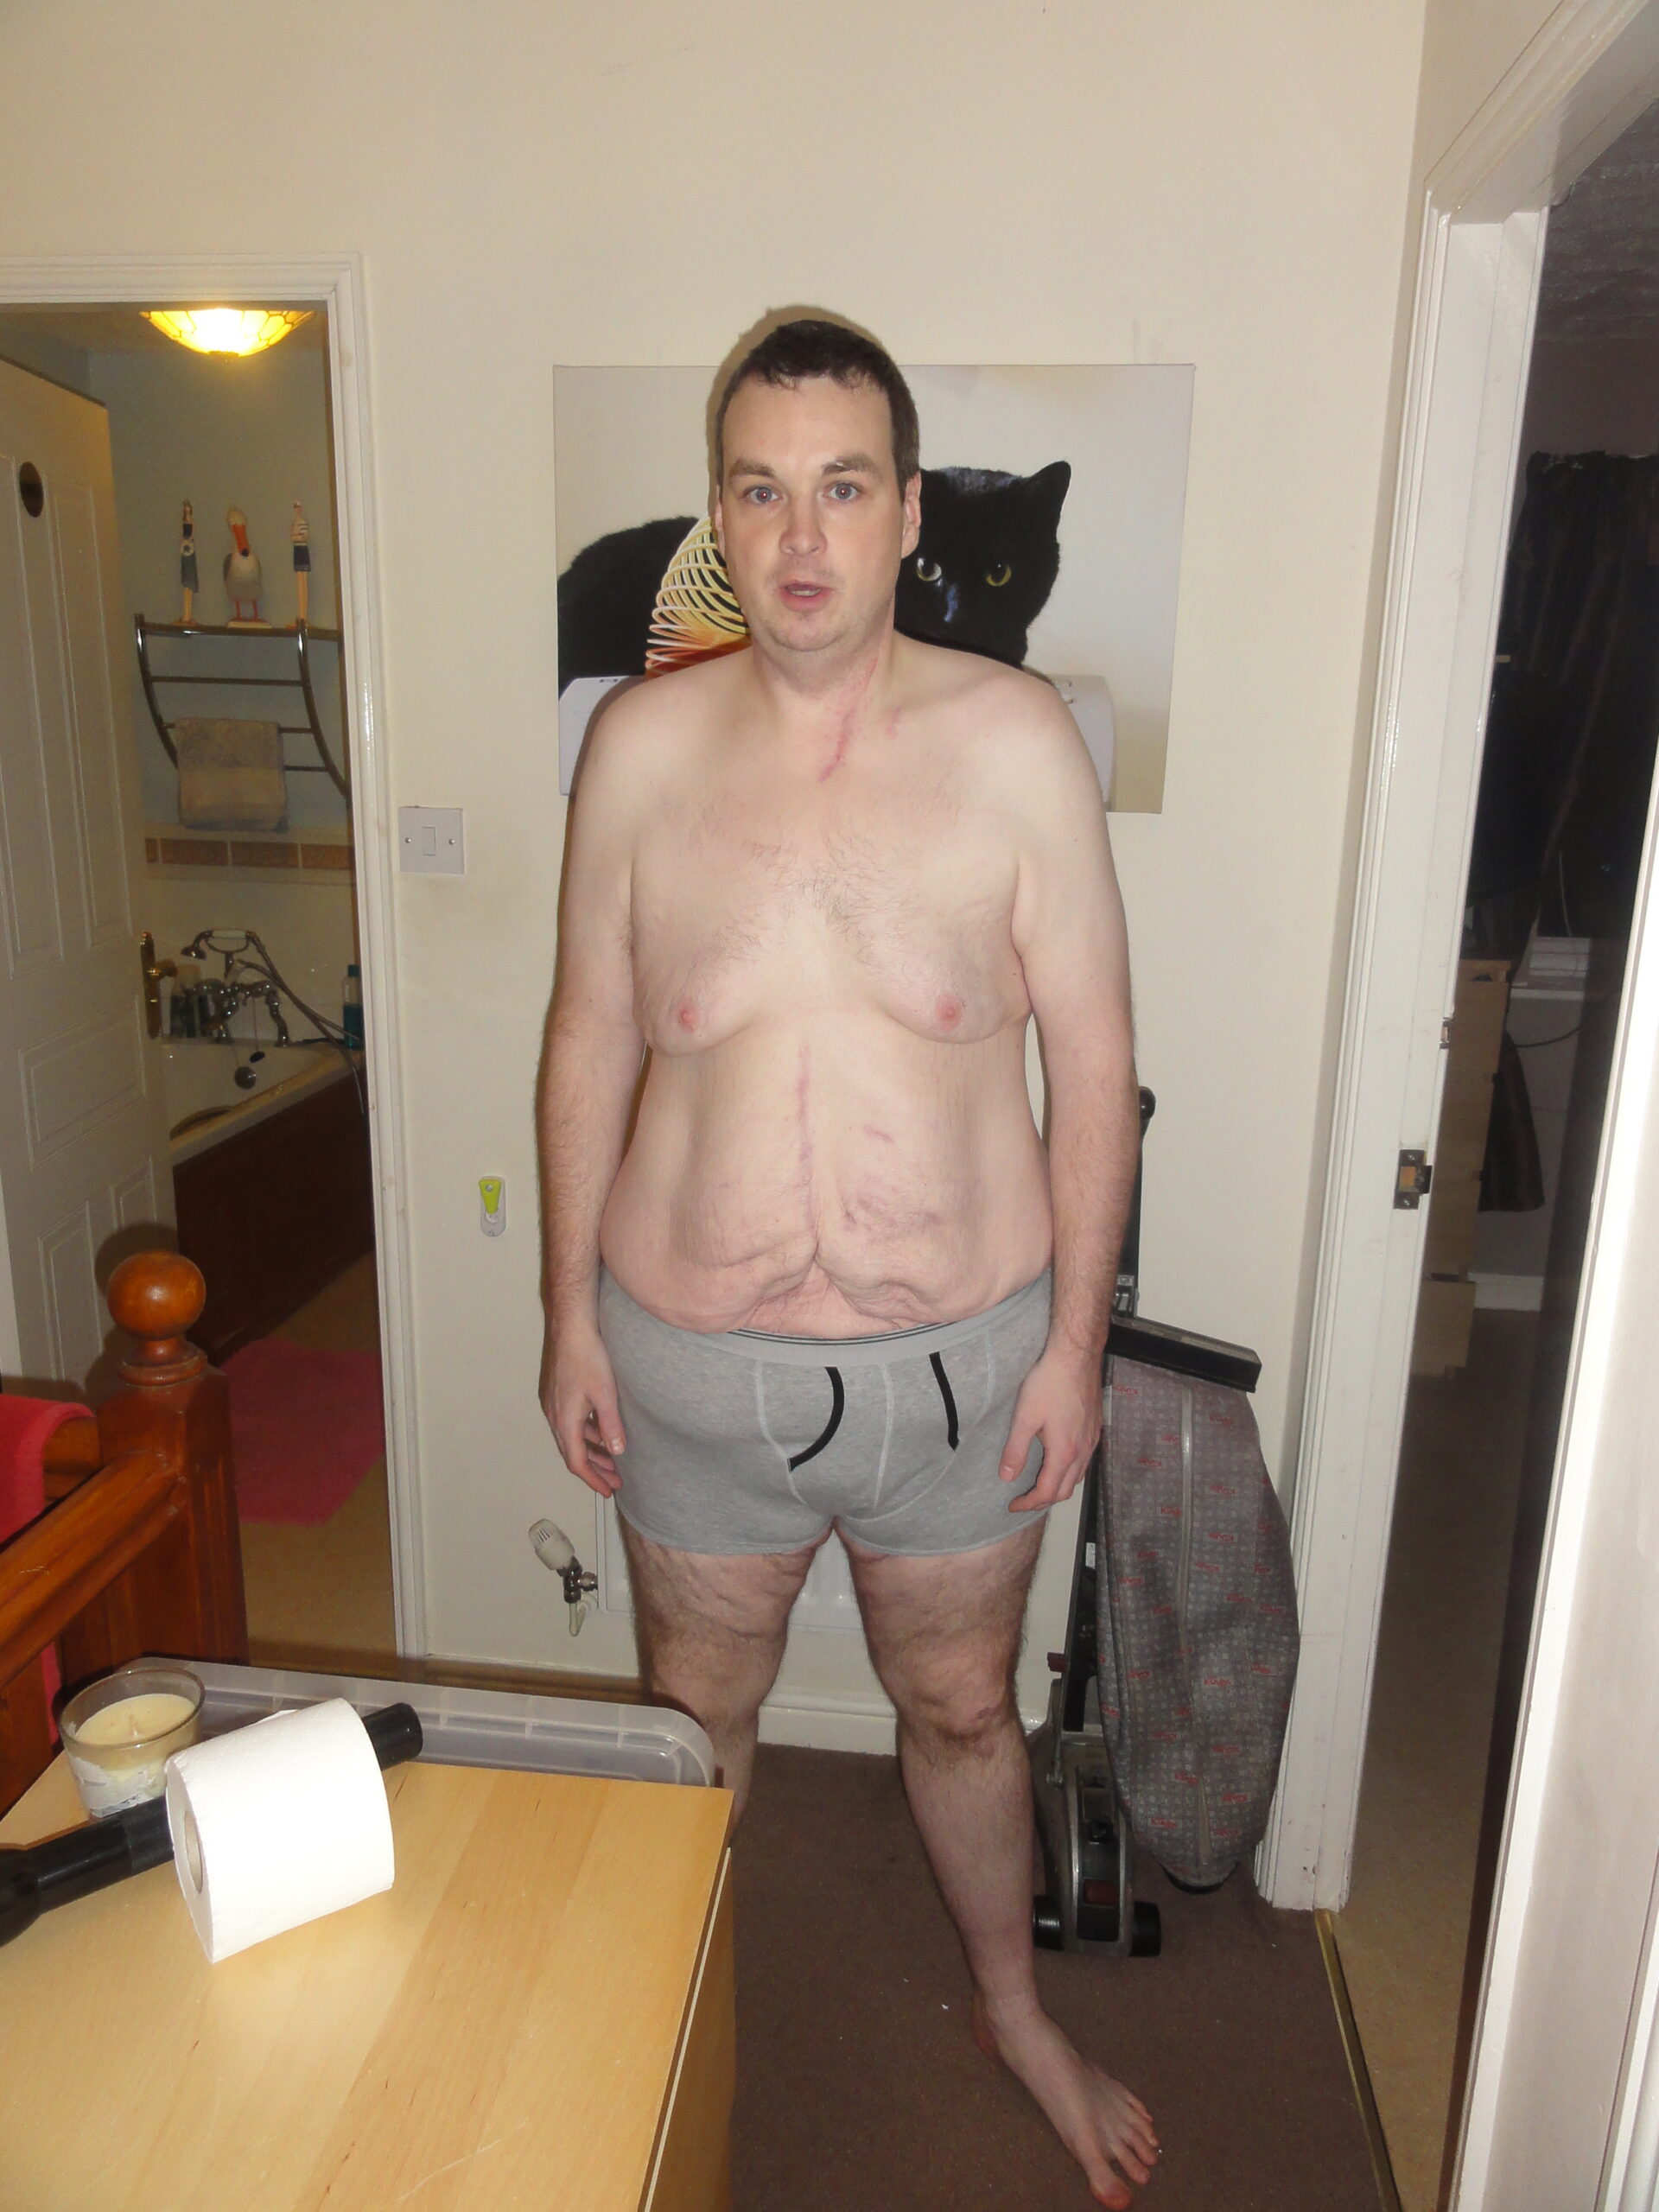 2013-10-26 – 3 Years Post-Surgery